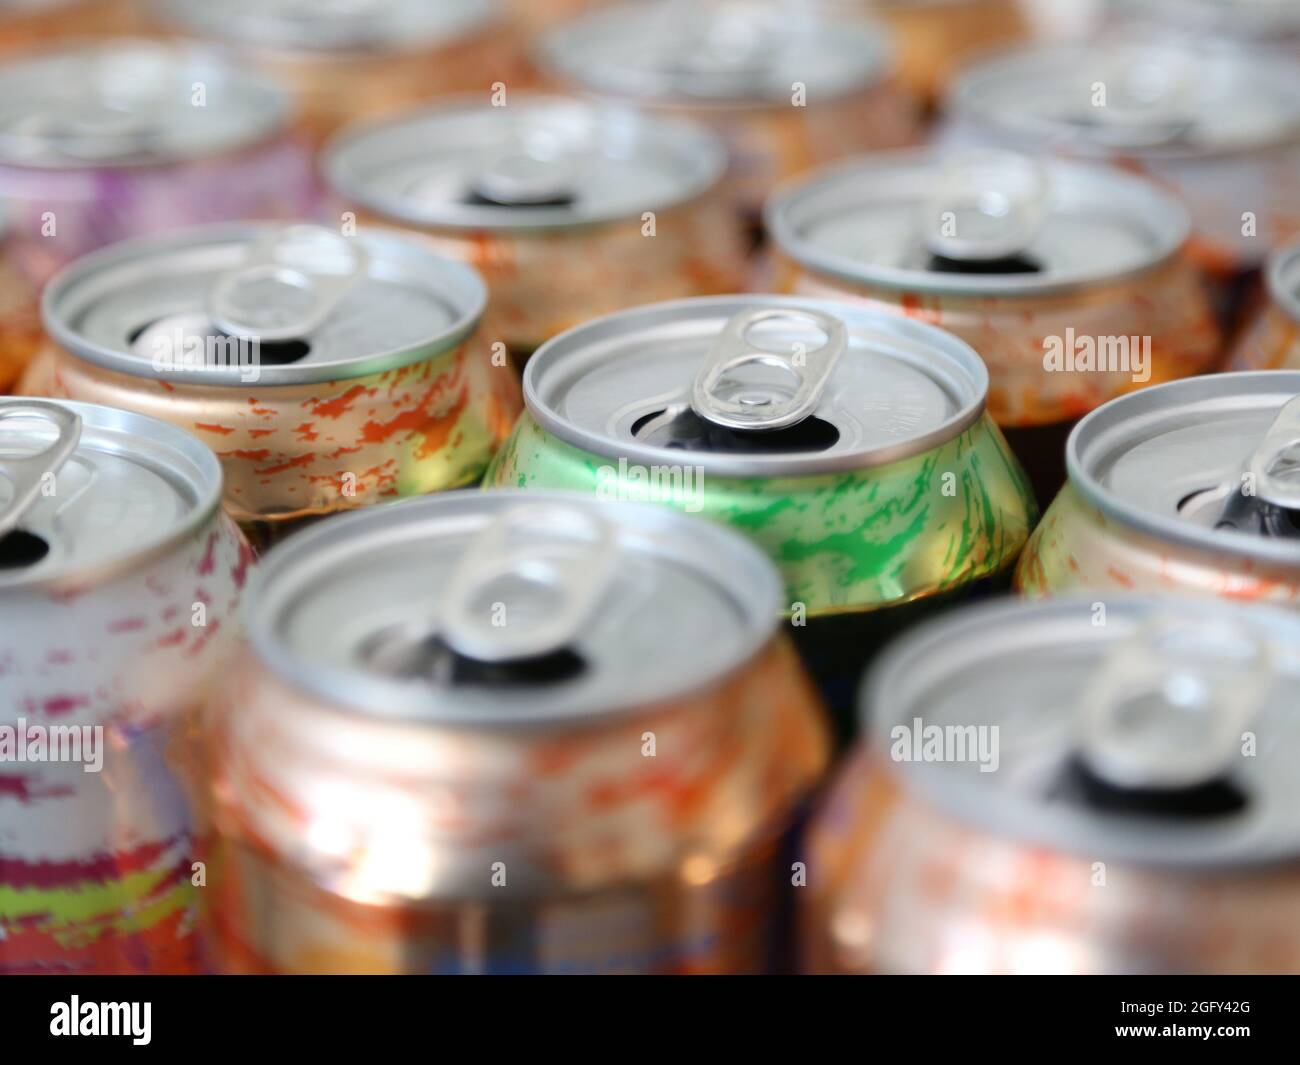 Opened La Croix carbonated / sparkling water cans are shown up close from an overhead view. For editorial uses only. Stock Photo